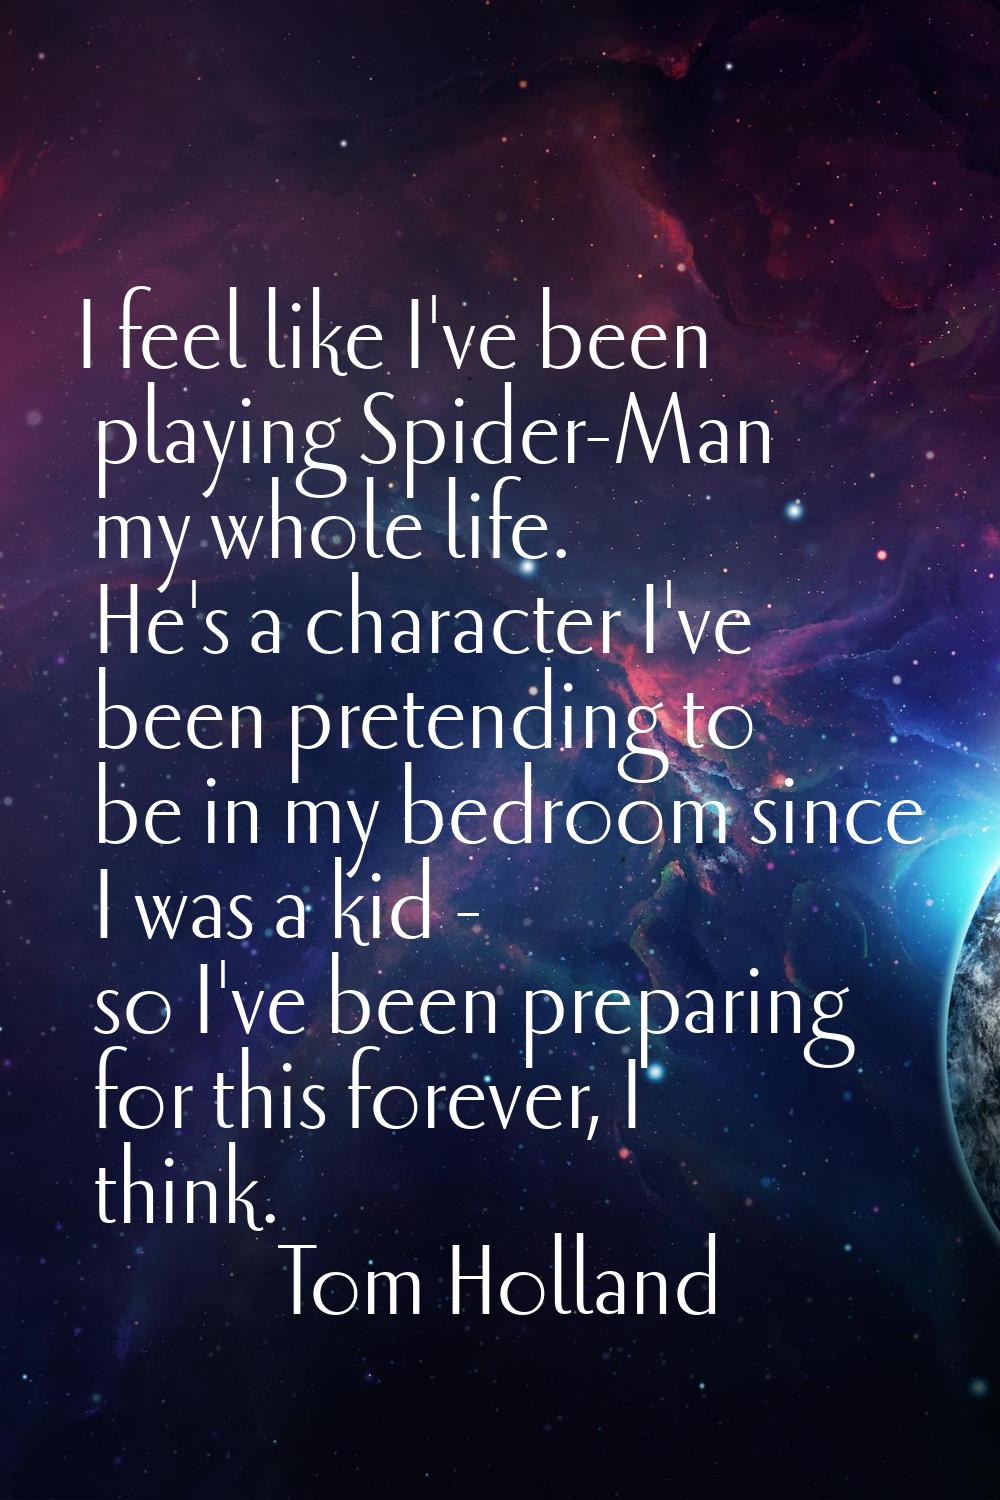 I feel like I've been playing Spider-Man my whole life. He's a character I've been pretending to be